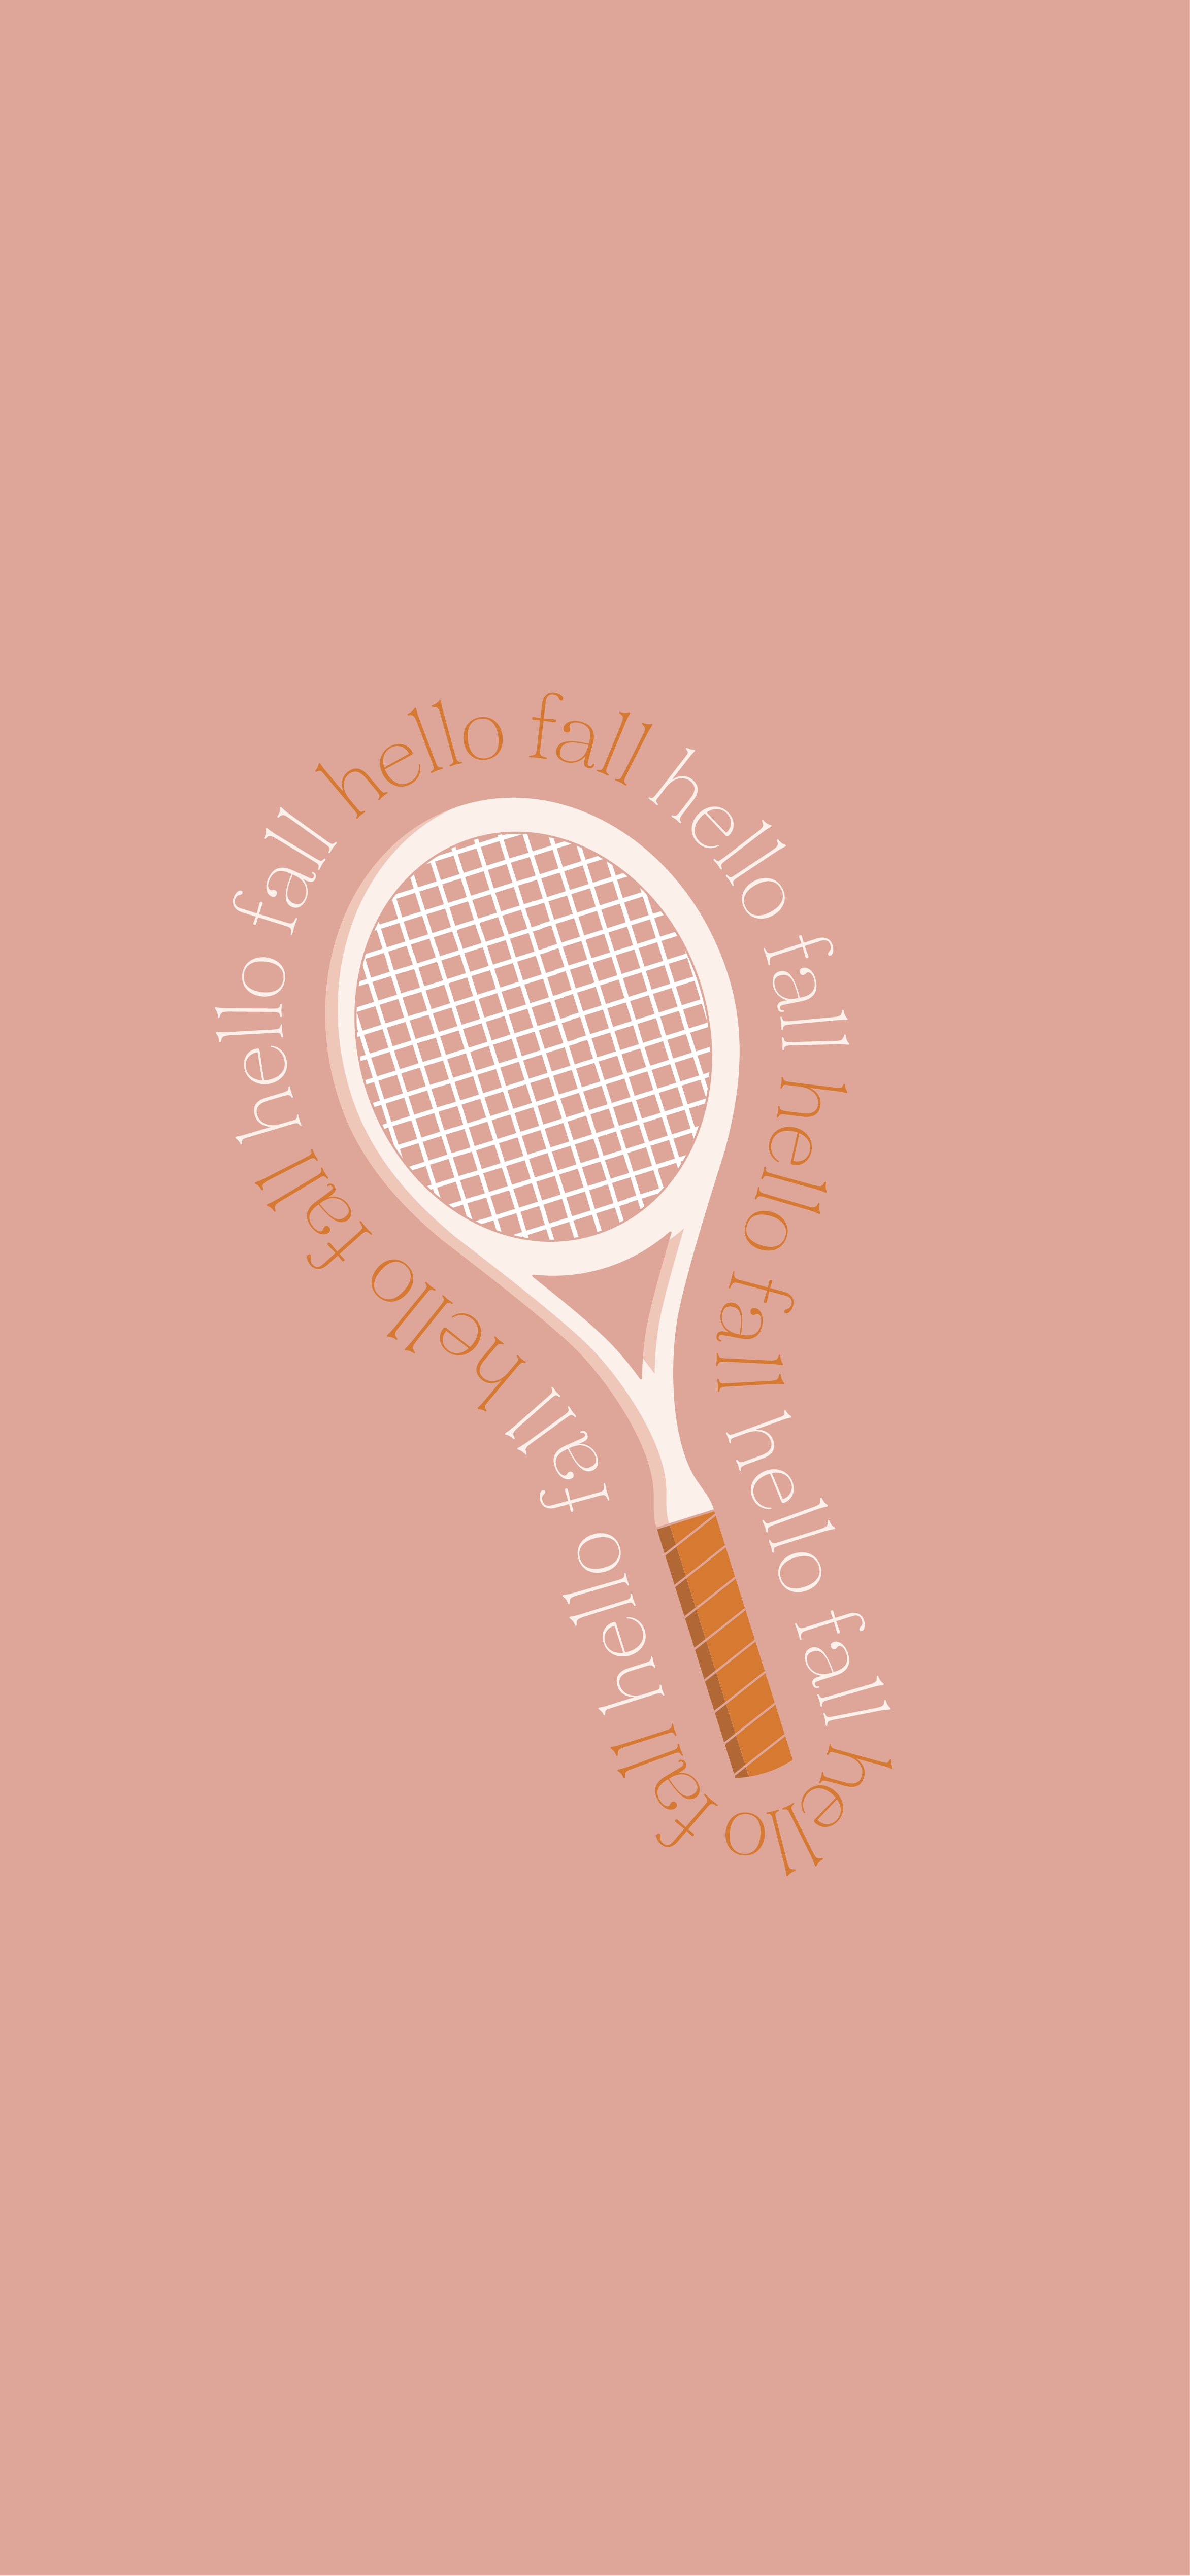 Tennis racket with the words hello fall in a circle around it - Tennis